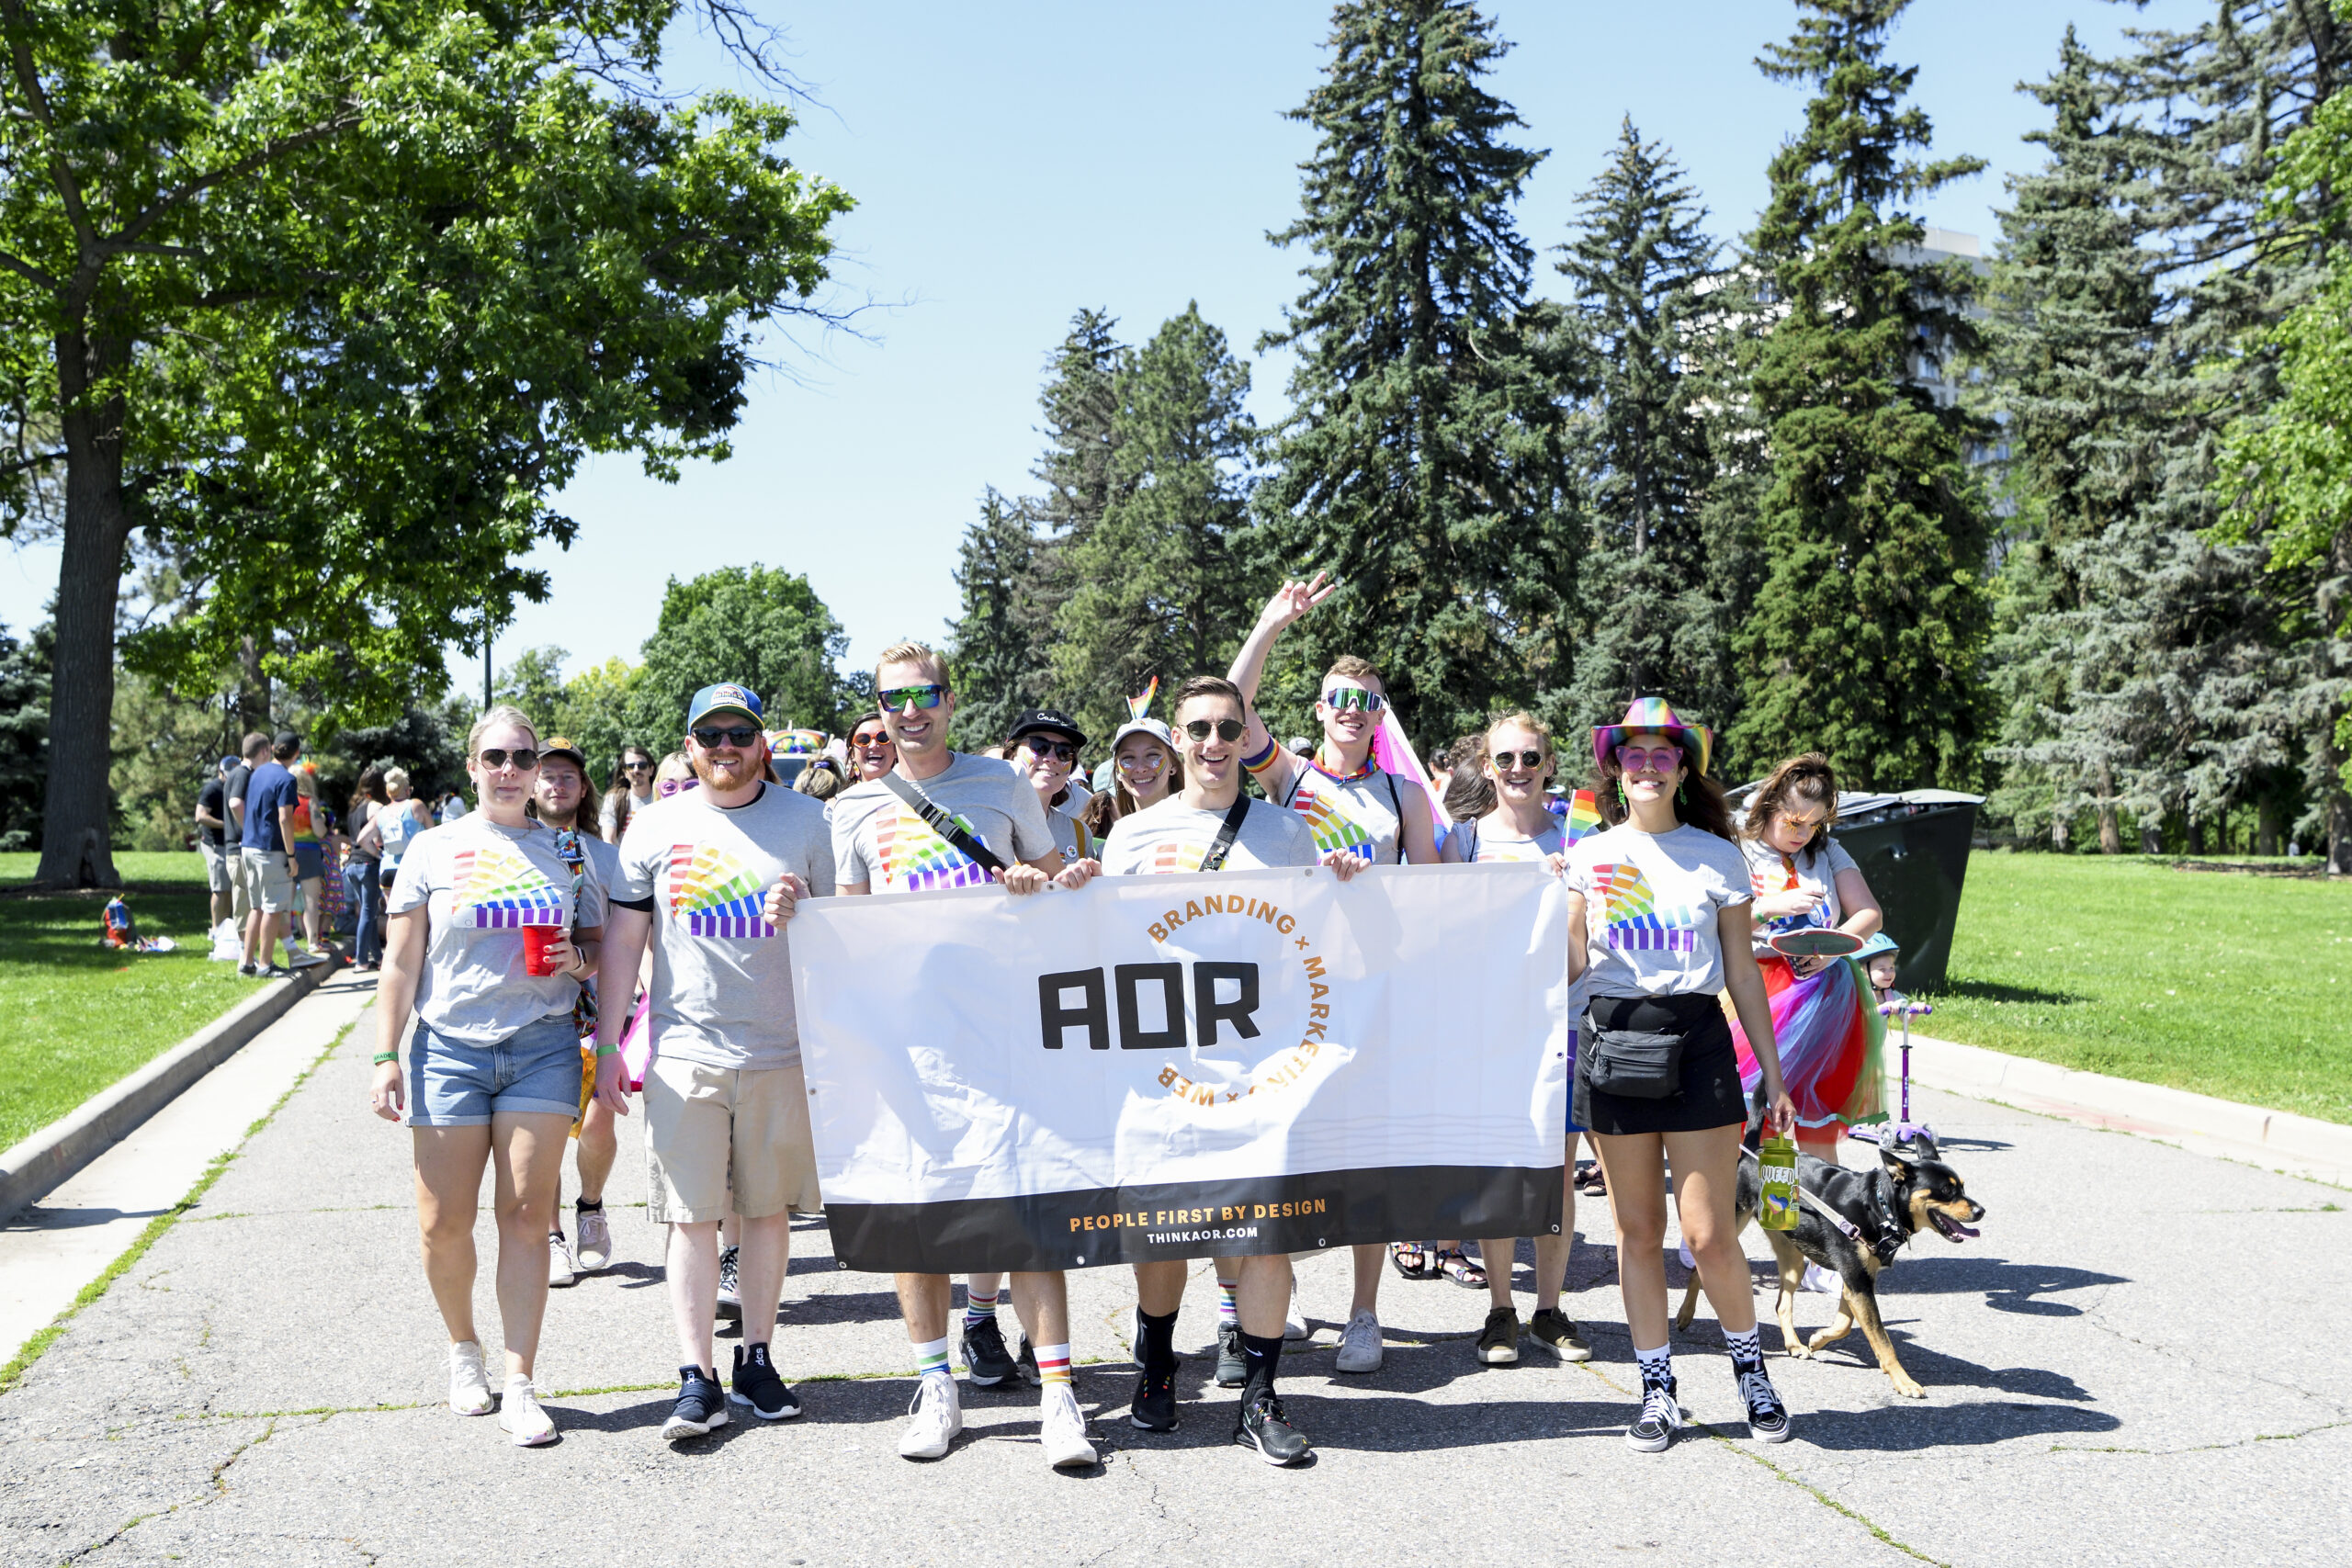 the team marching at a pride parage